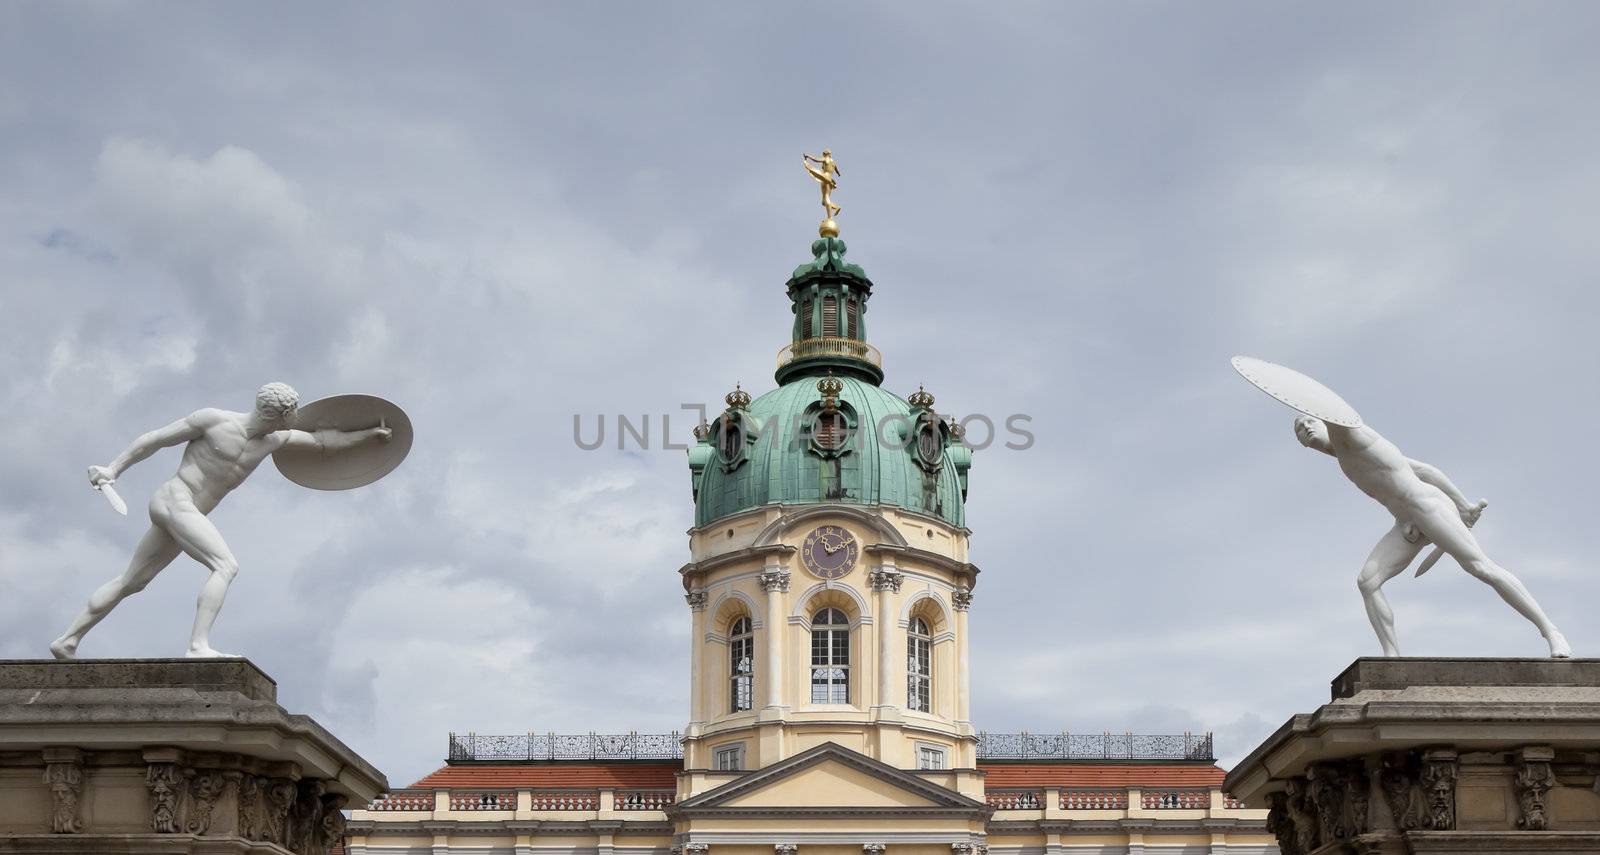 An image of the beautiful Castle Charlottenburg in Berlin